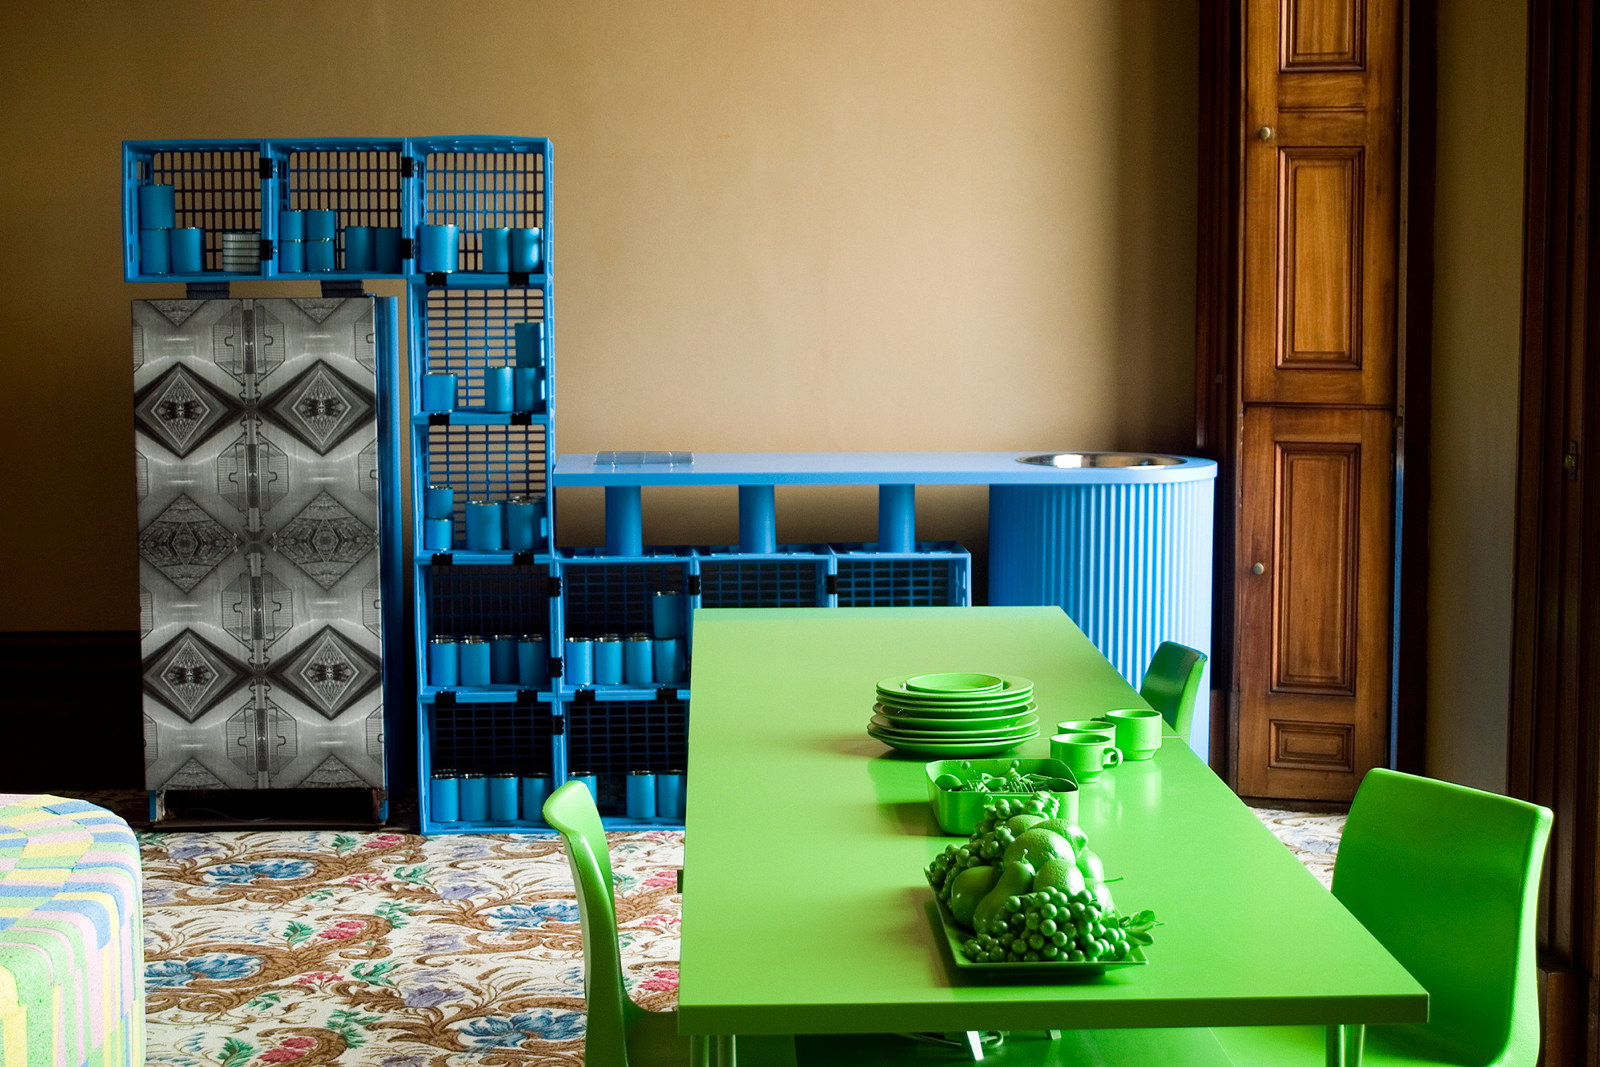 A green table with green plates and cutlery in front of a blue structure made from milk crates